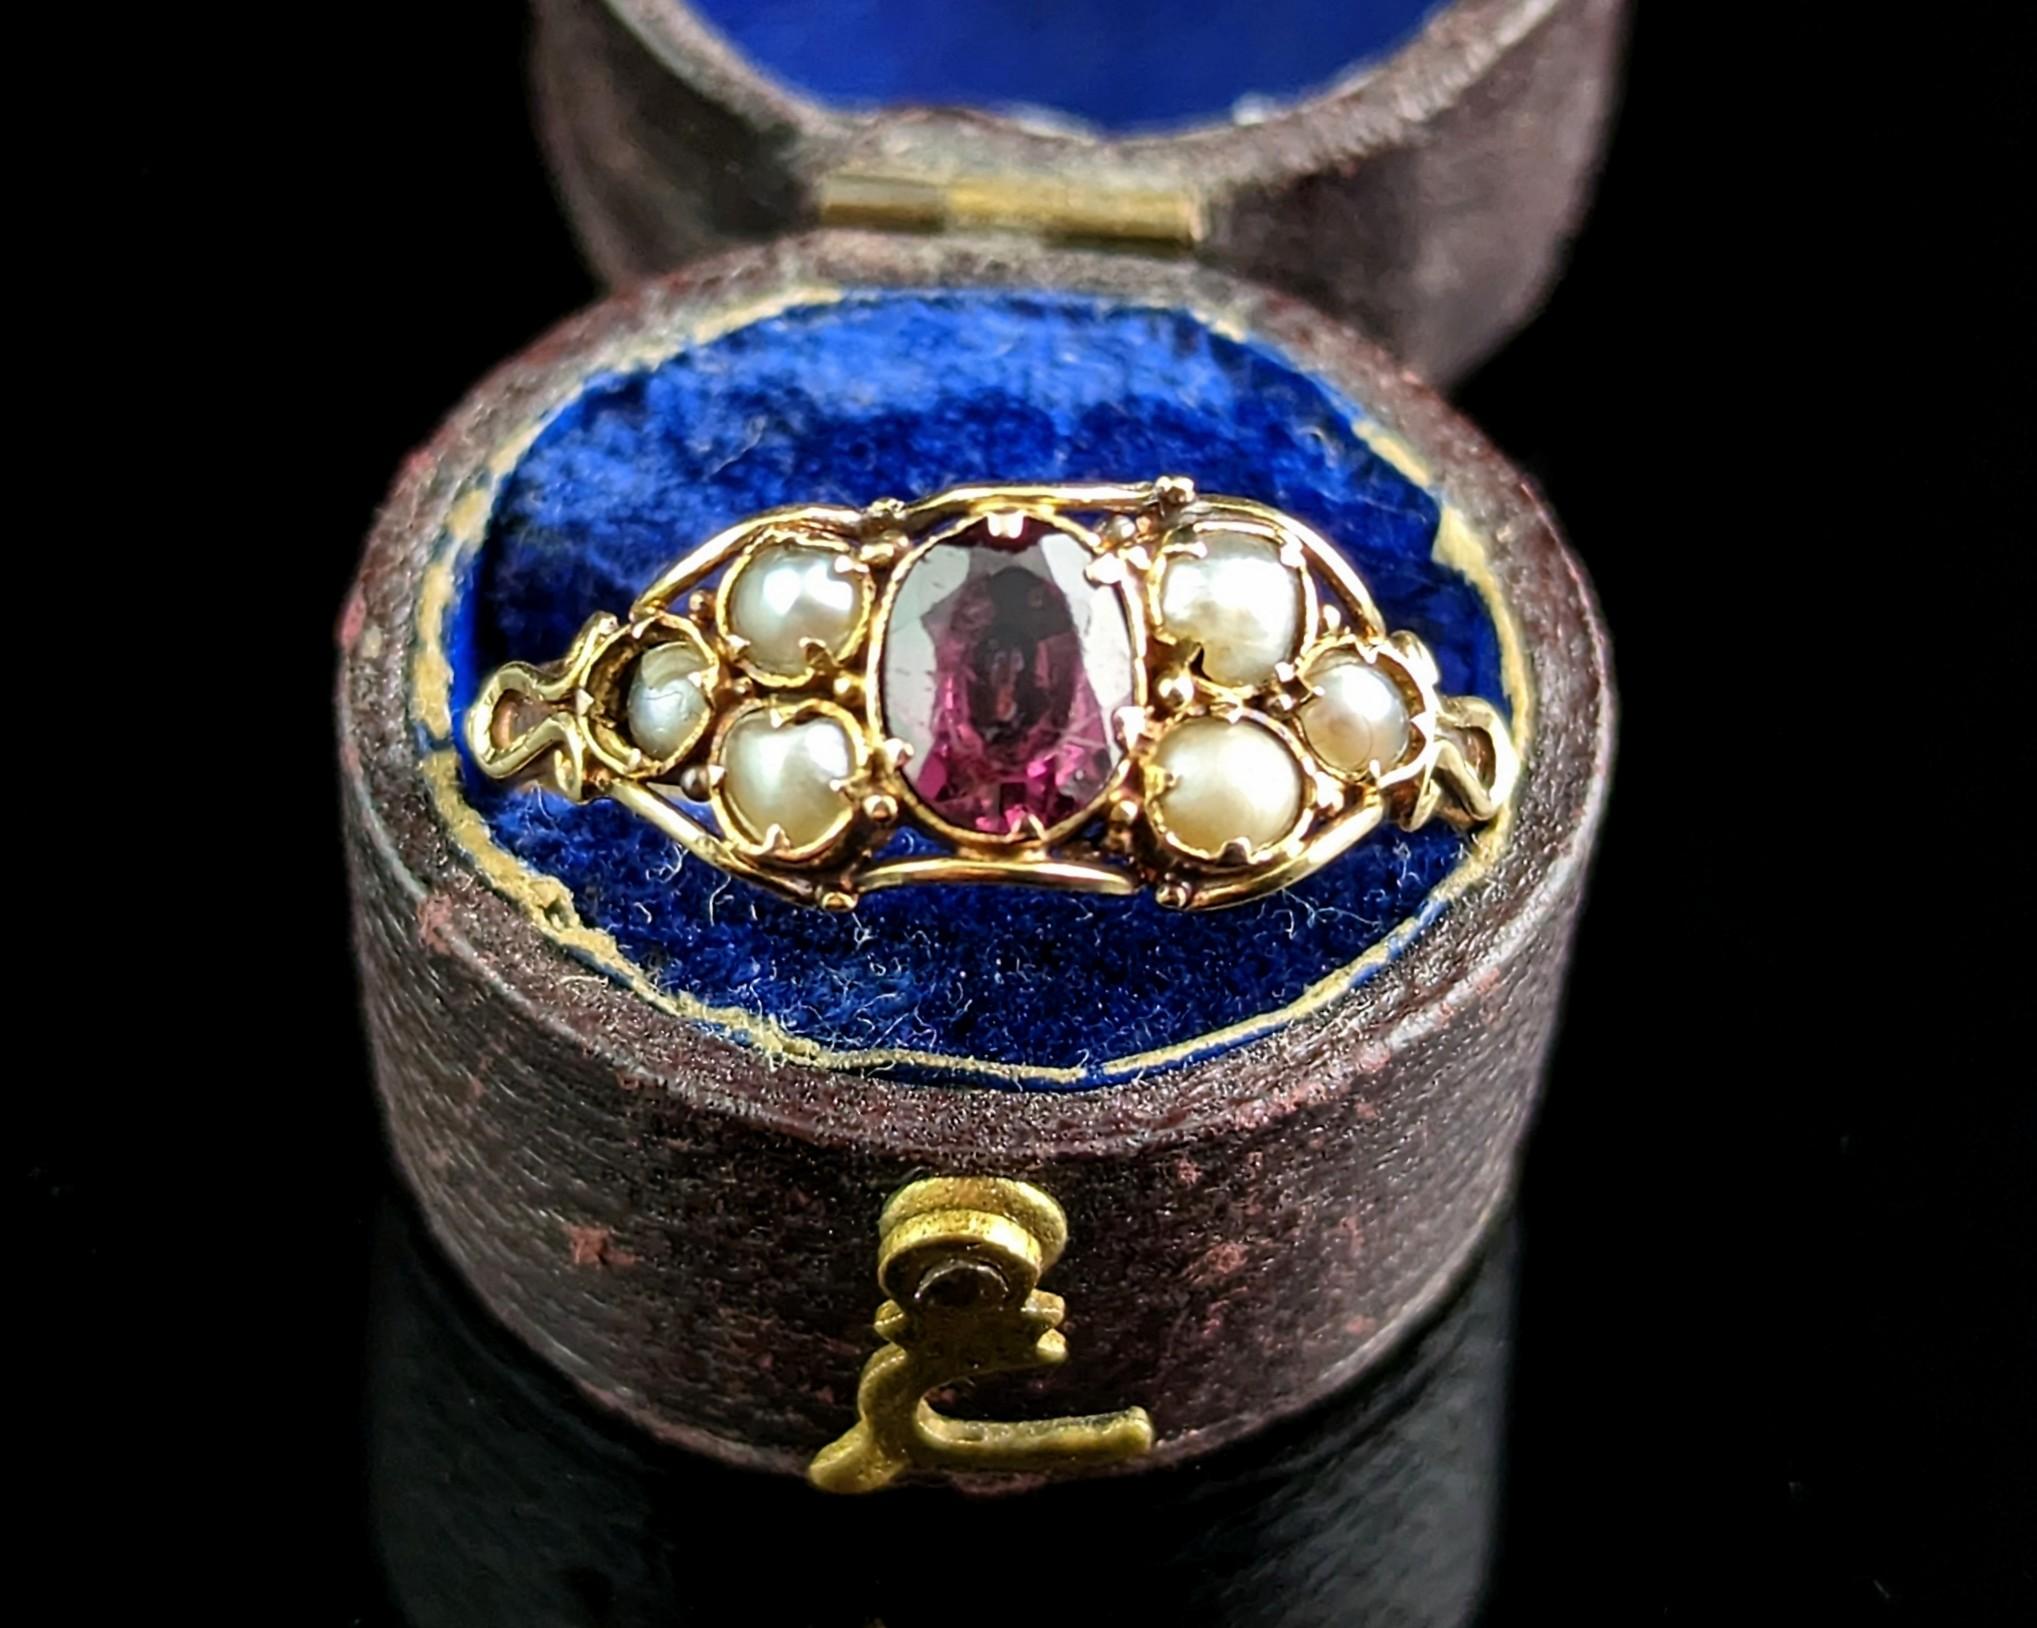 You will be charmed by this romantic antique, early Victorian Almandine garnet and pearl ring.

It features a lovely central Almandine garnet with rich red and purple tones to the side of the garnet there are three creamy seed pearls set in a